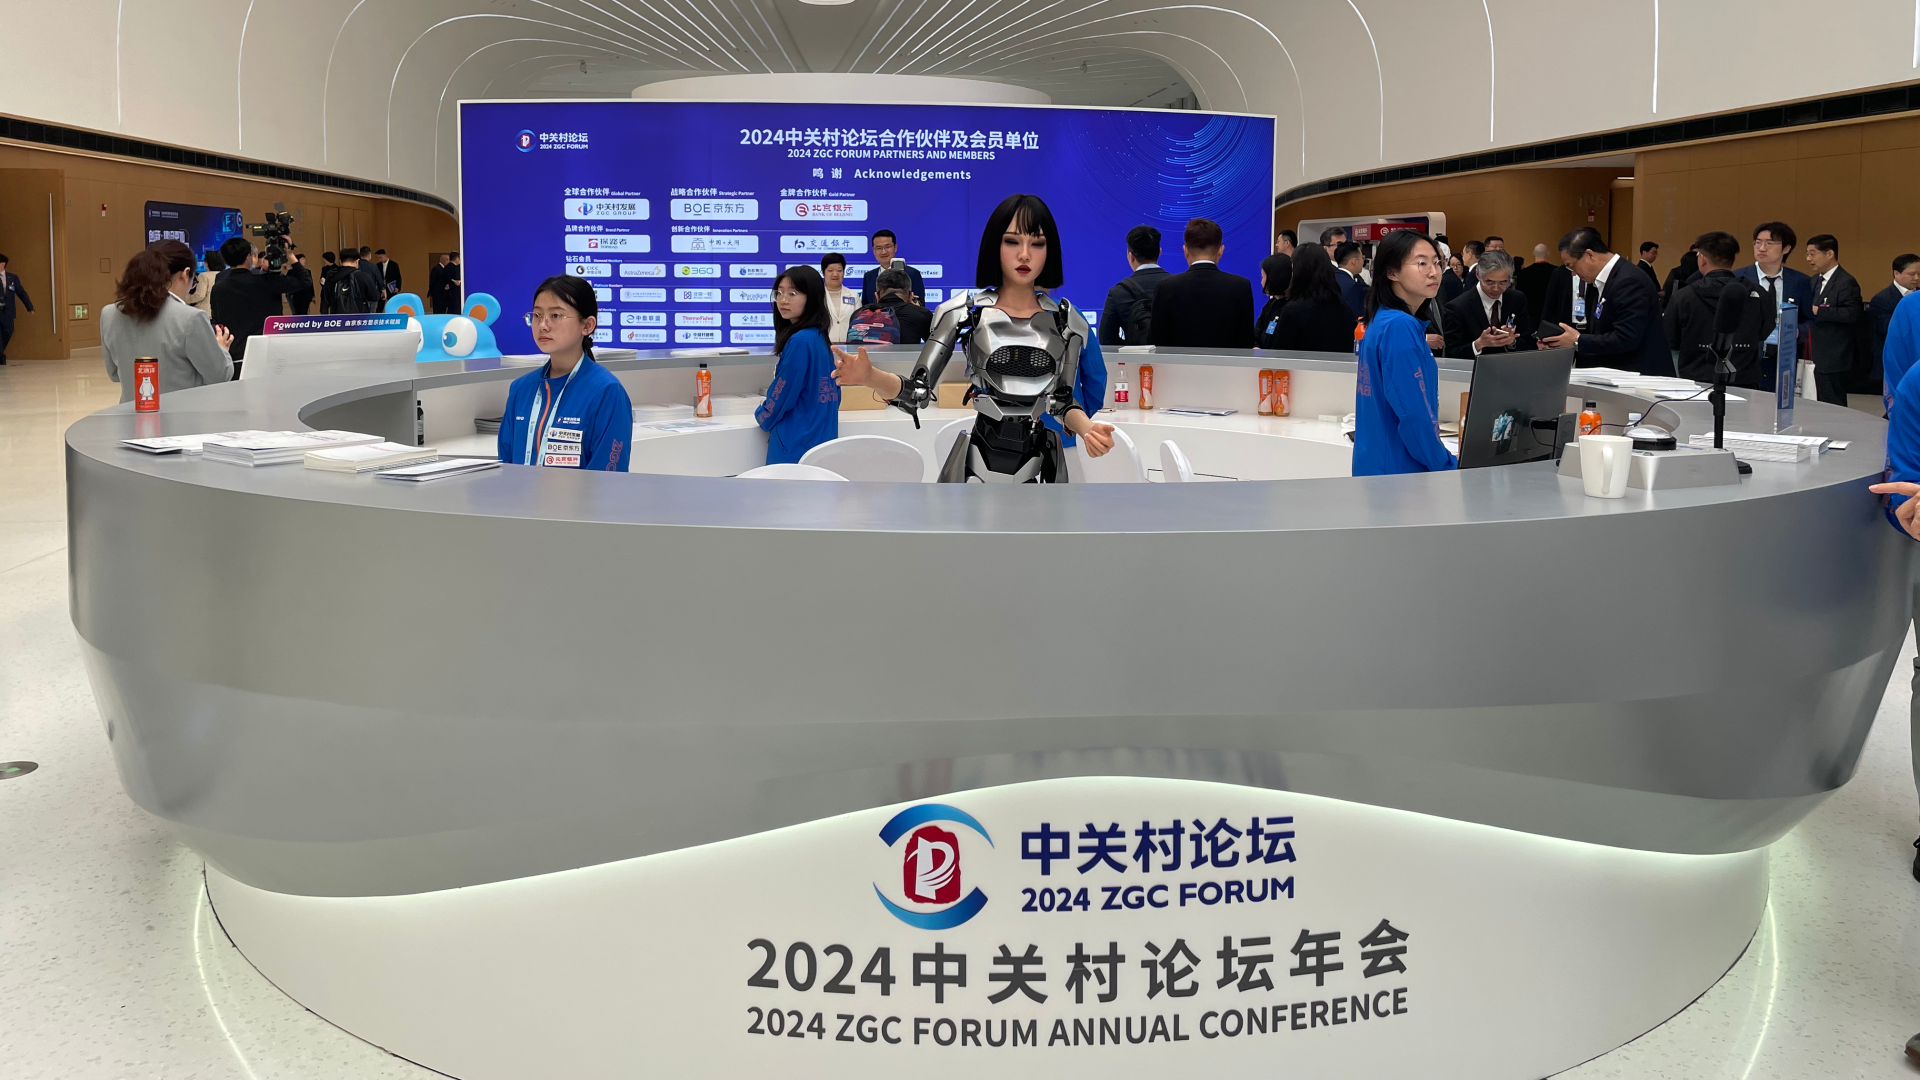 Live: Reporter’s on-site visit to 2024 Zhongguancun Forum [Video]